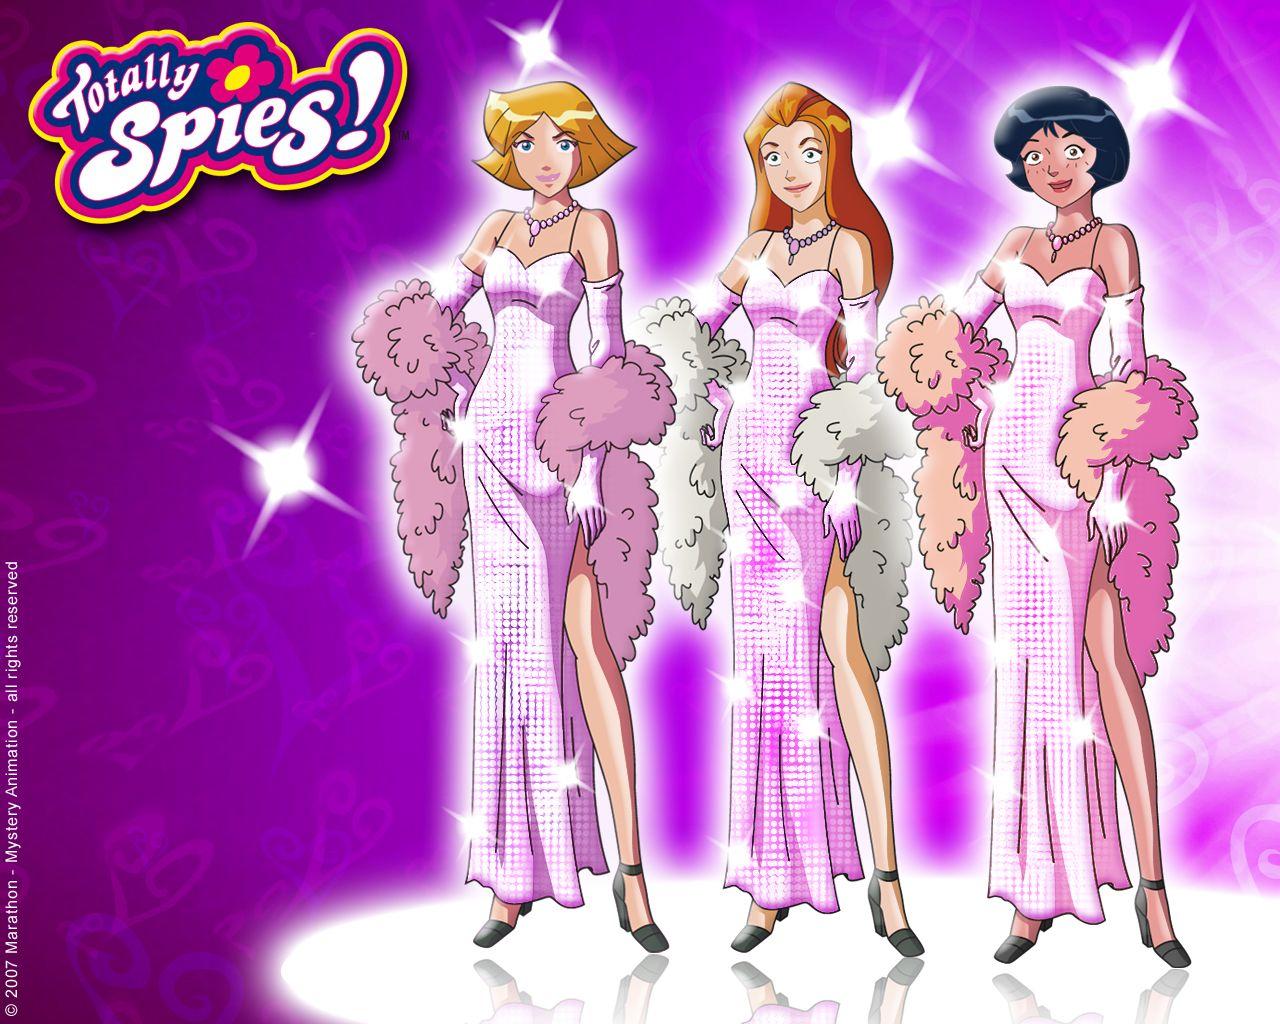 Totally Spies Wallpaper: Wallpaper!!!!!!!!. Totally spies, Clover totally spies, Spy outfit